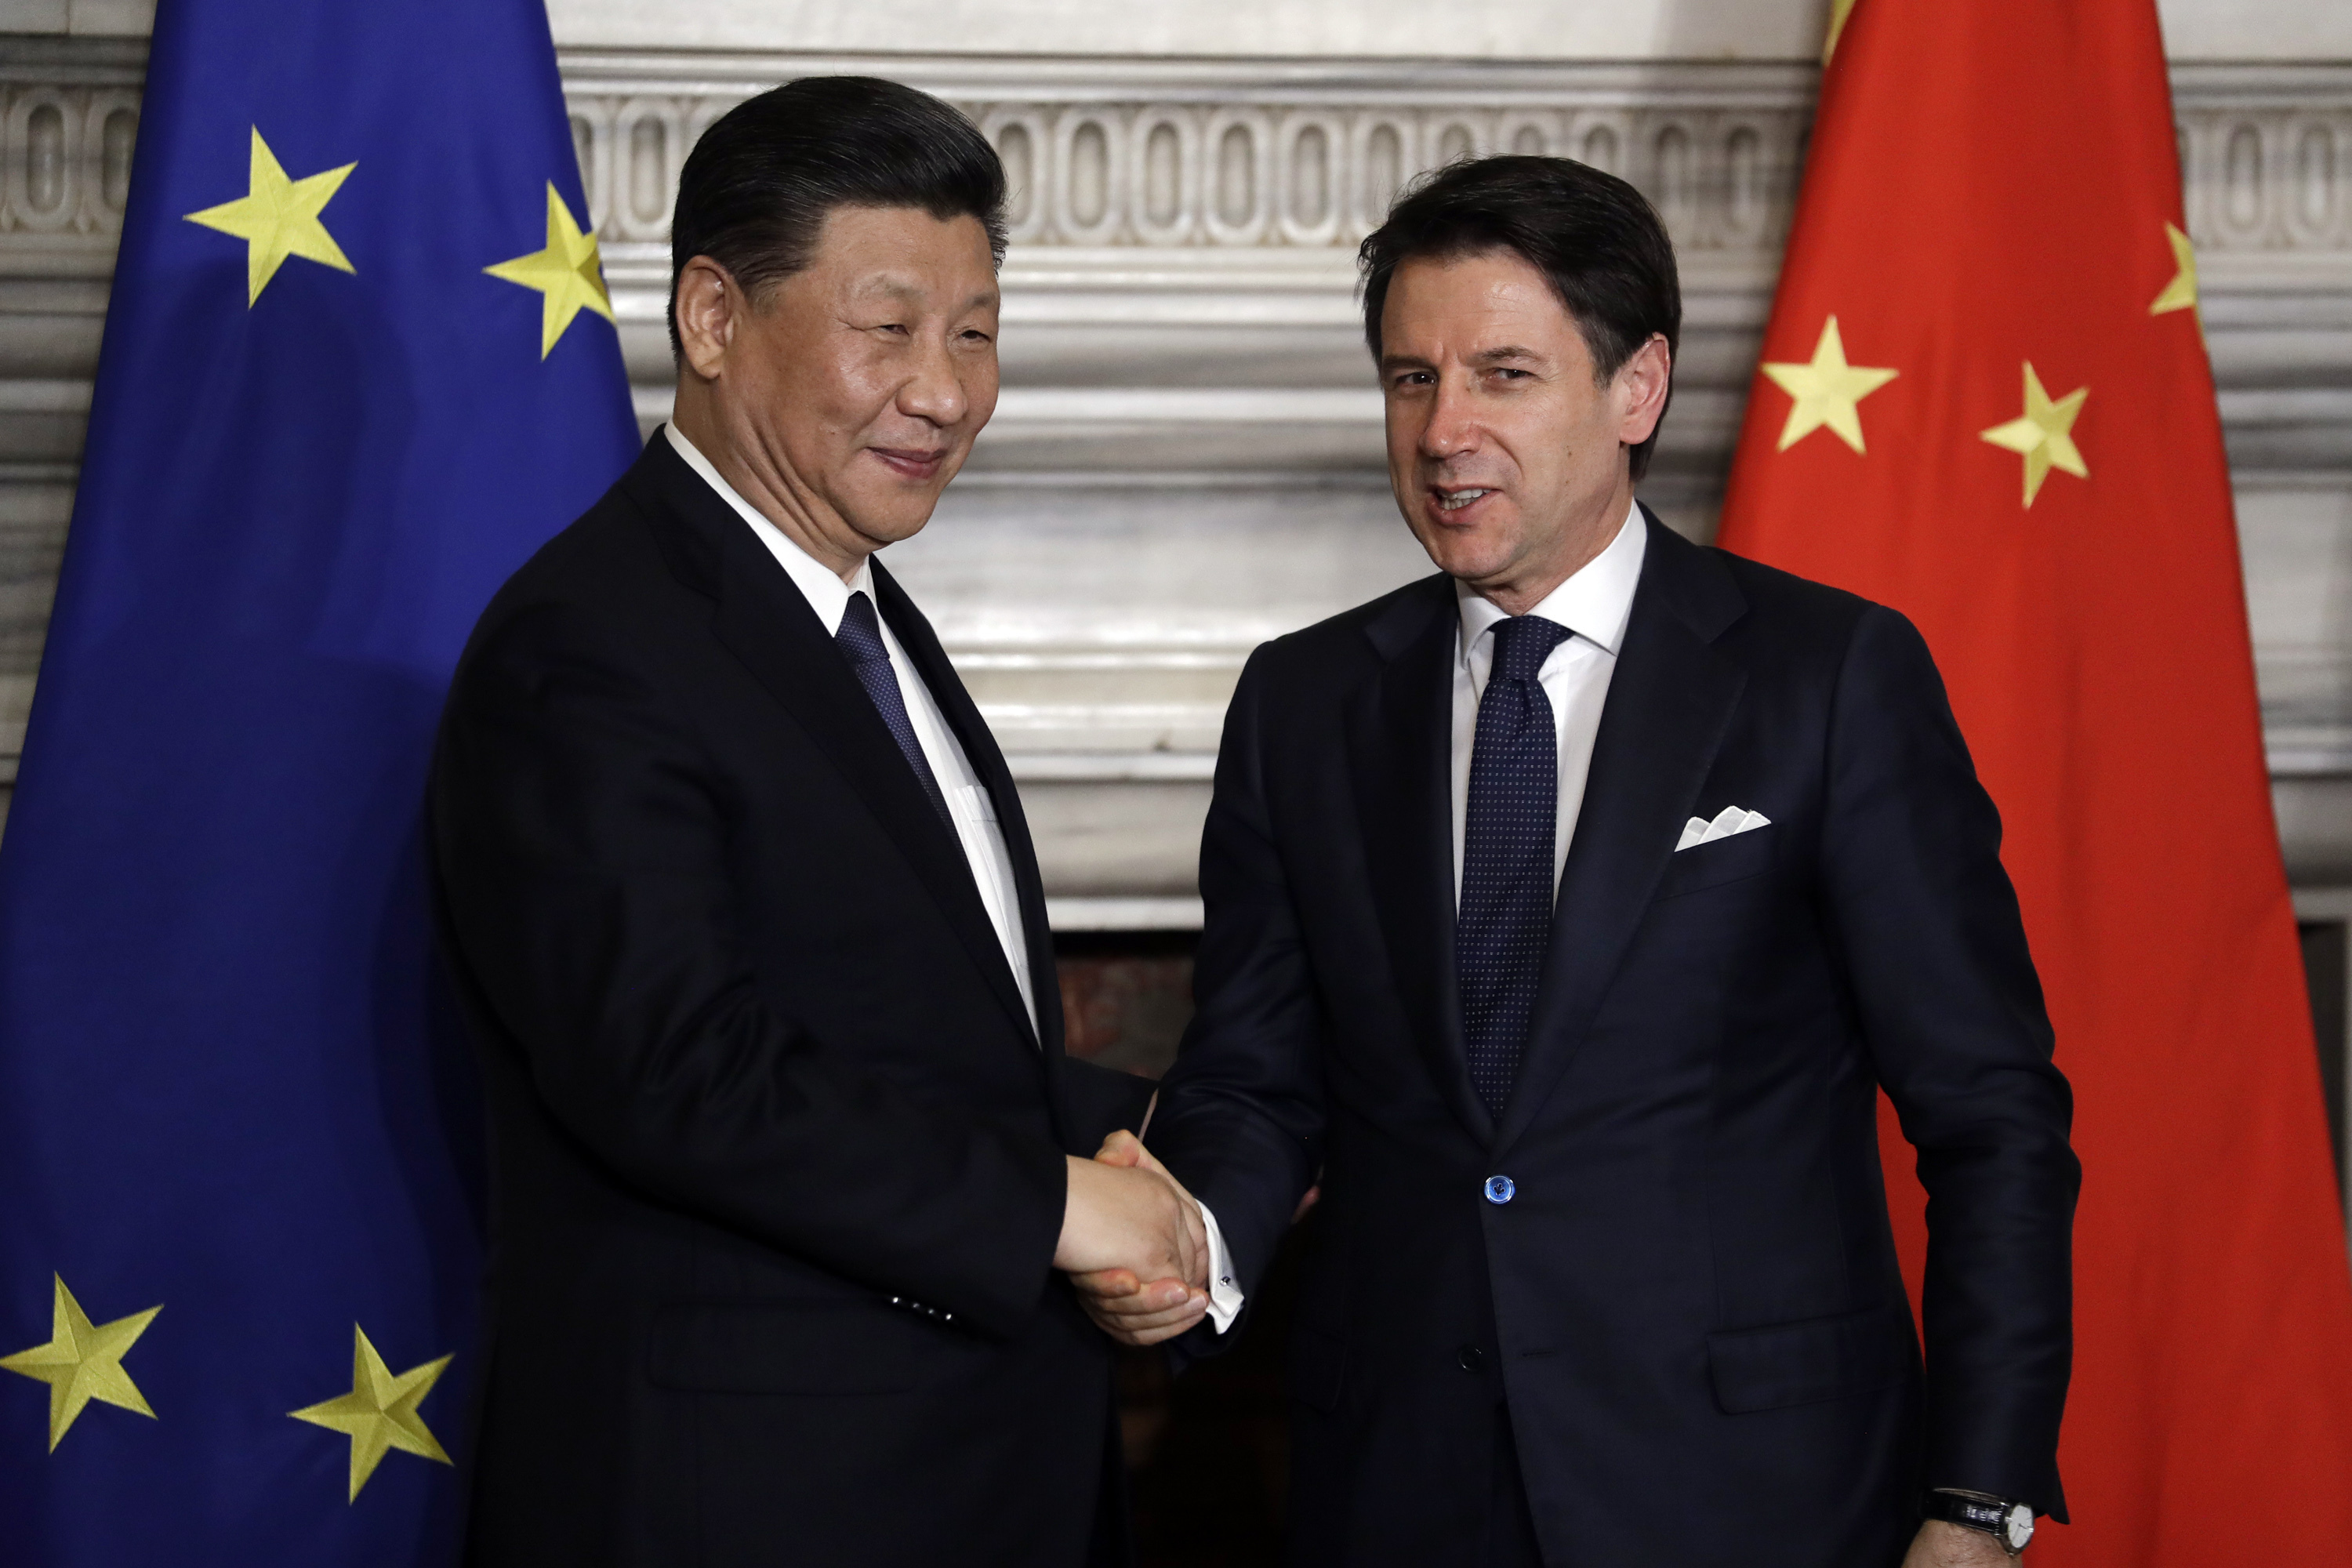 Italy signs deals worth 2.5 billion euros with China